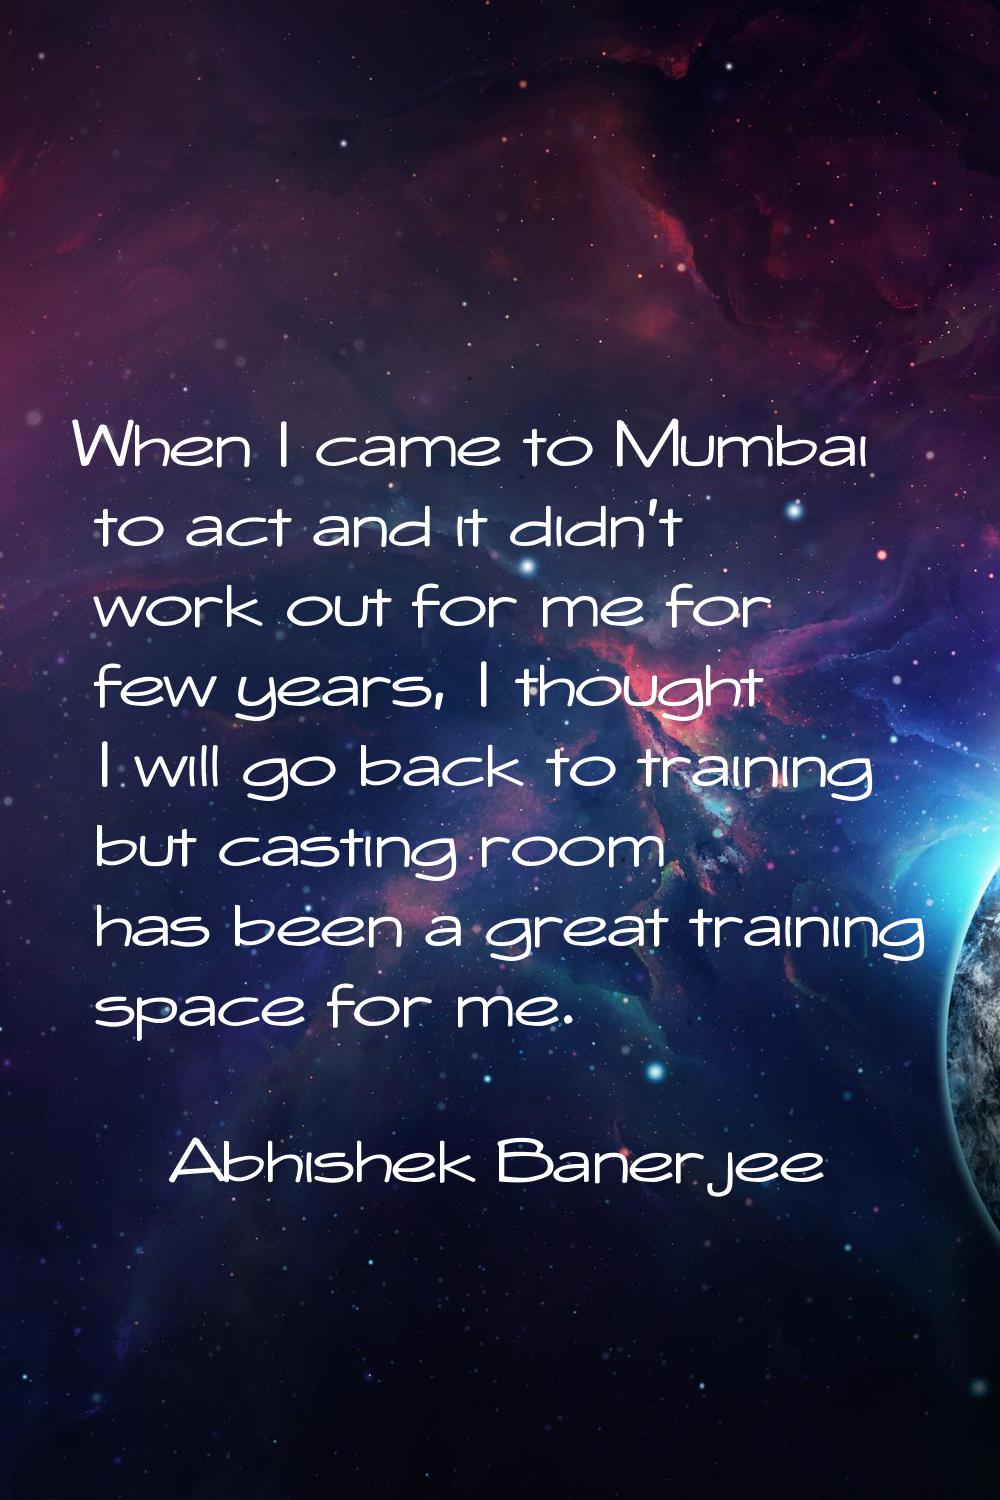 When I came to Mumbai to act and it didn't work out for me for few years, I thought I will go back 